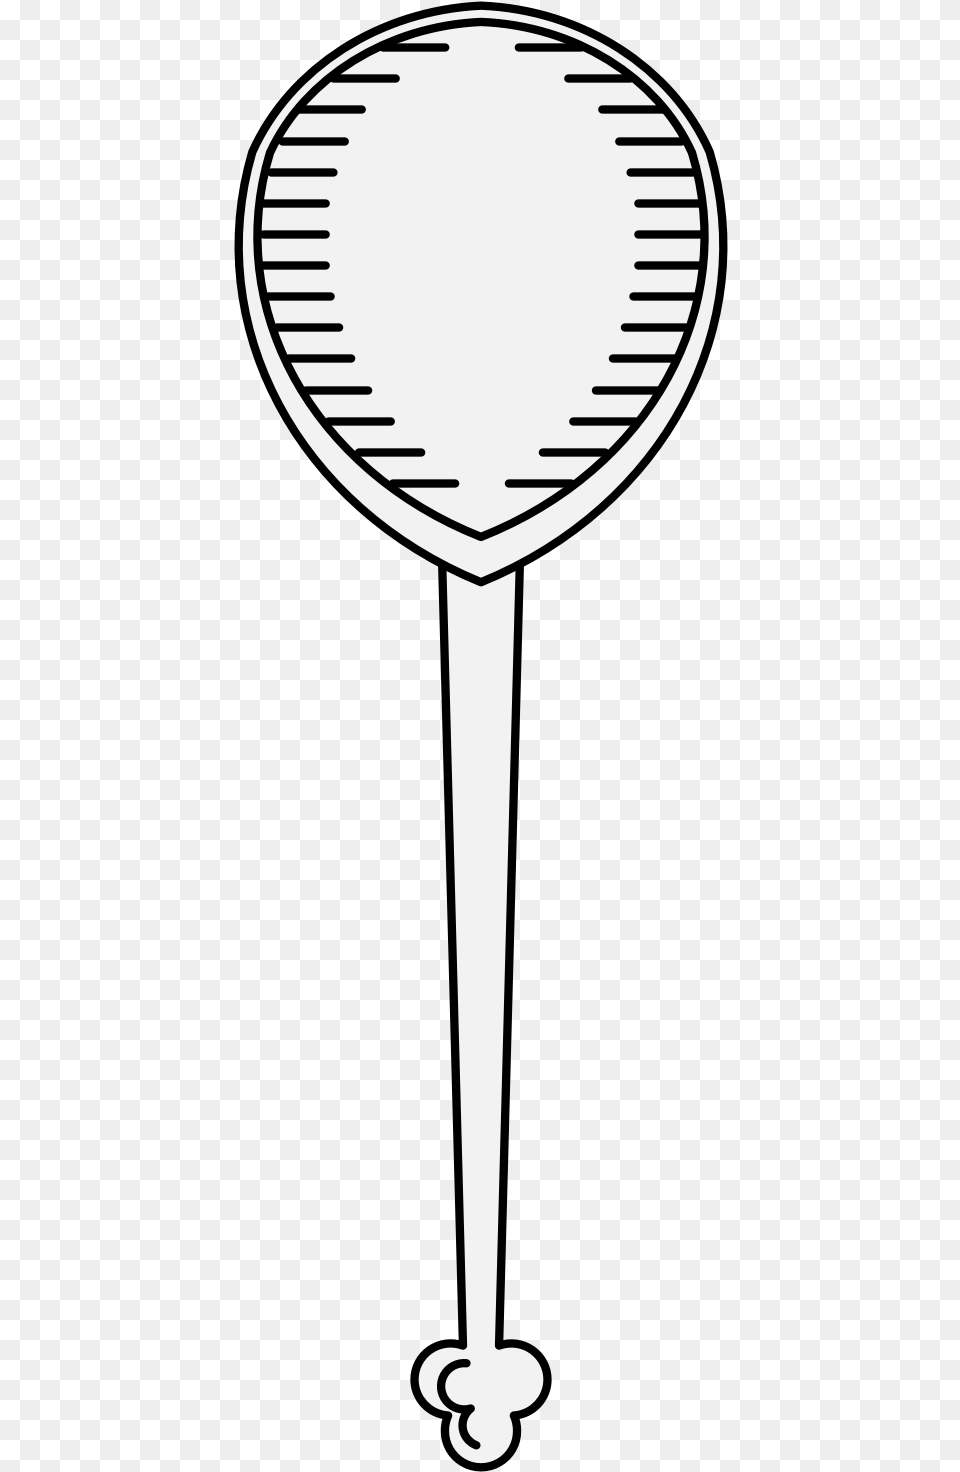 Details Clipart Attrezzi Per Grill, Cutlery, Spoon, Glass, Stencil Png Image